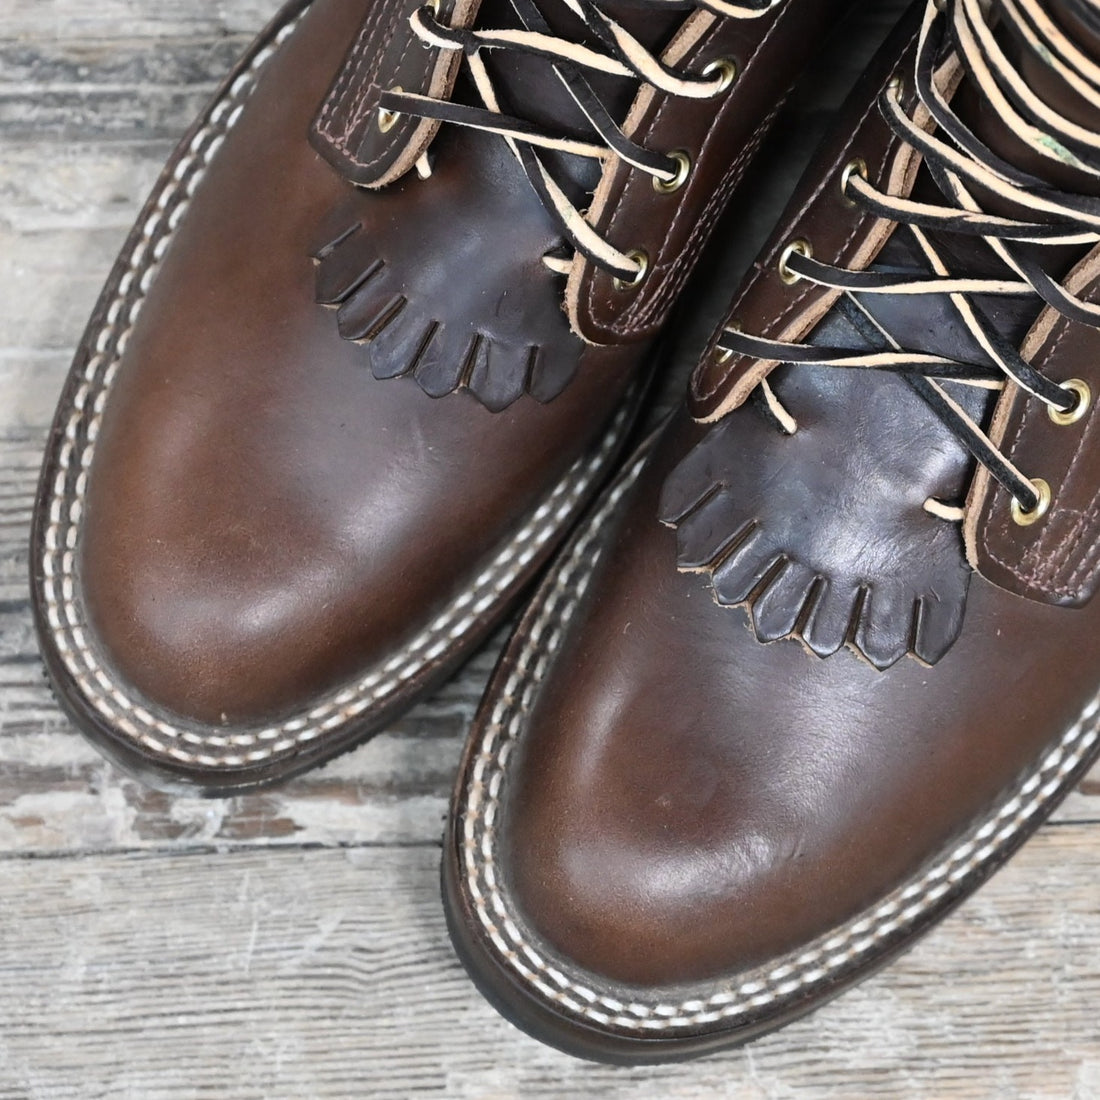 Nicks Rancher Boot in Chrome-Tanned Brown Heritage Leather view of toe